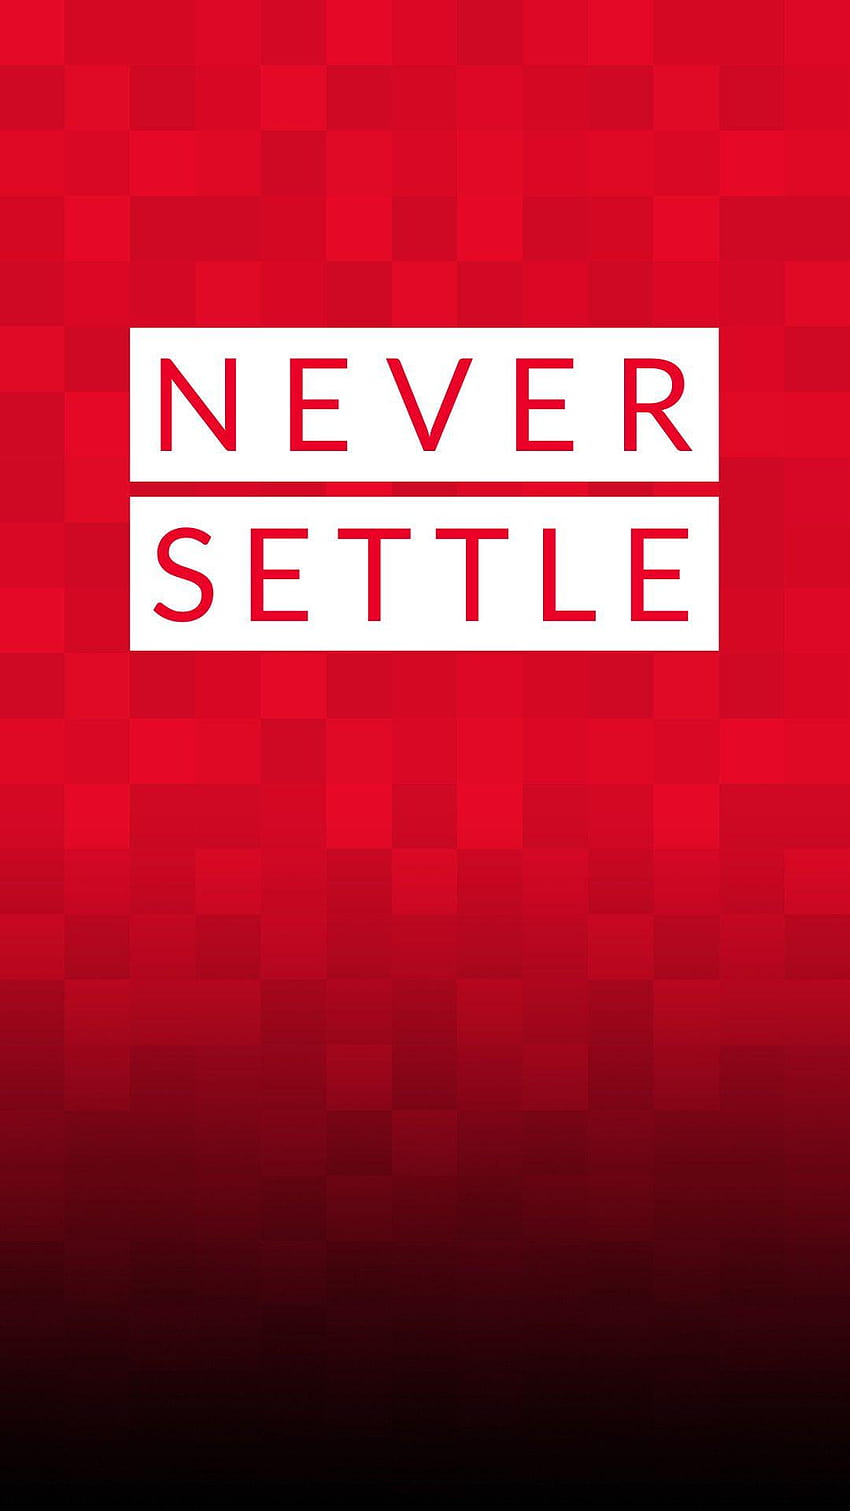 Never Settle iPhone Wallpaper - iPhone Wallpapers